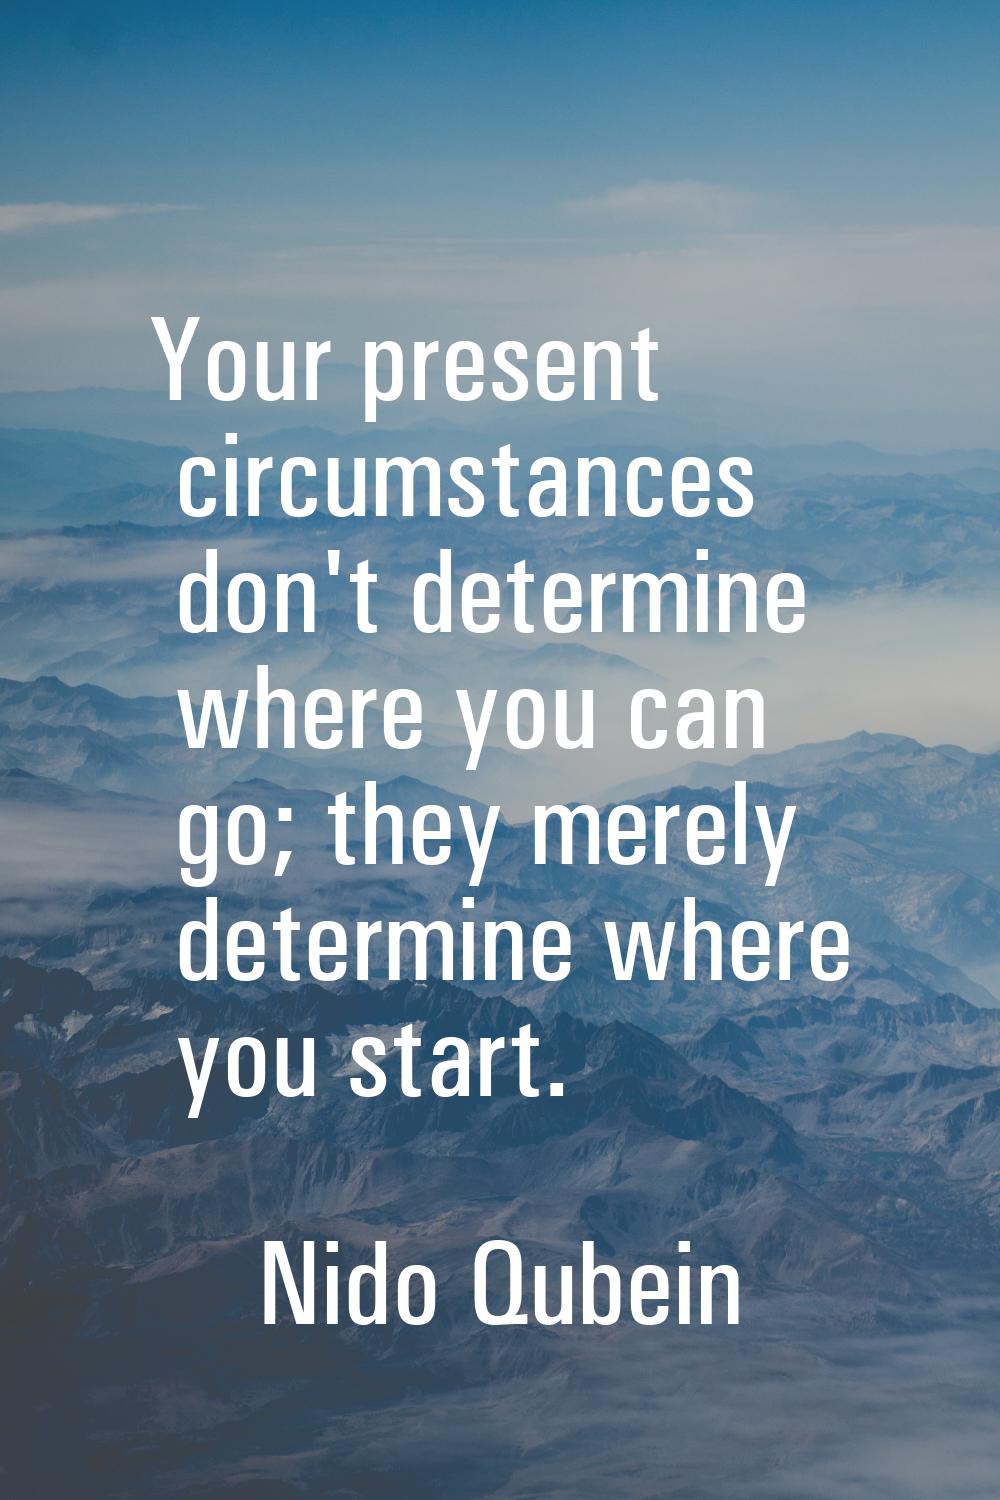 Your present circumstances don't determine where you can go; they merely determine where you start.